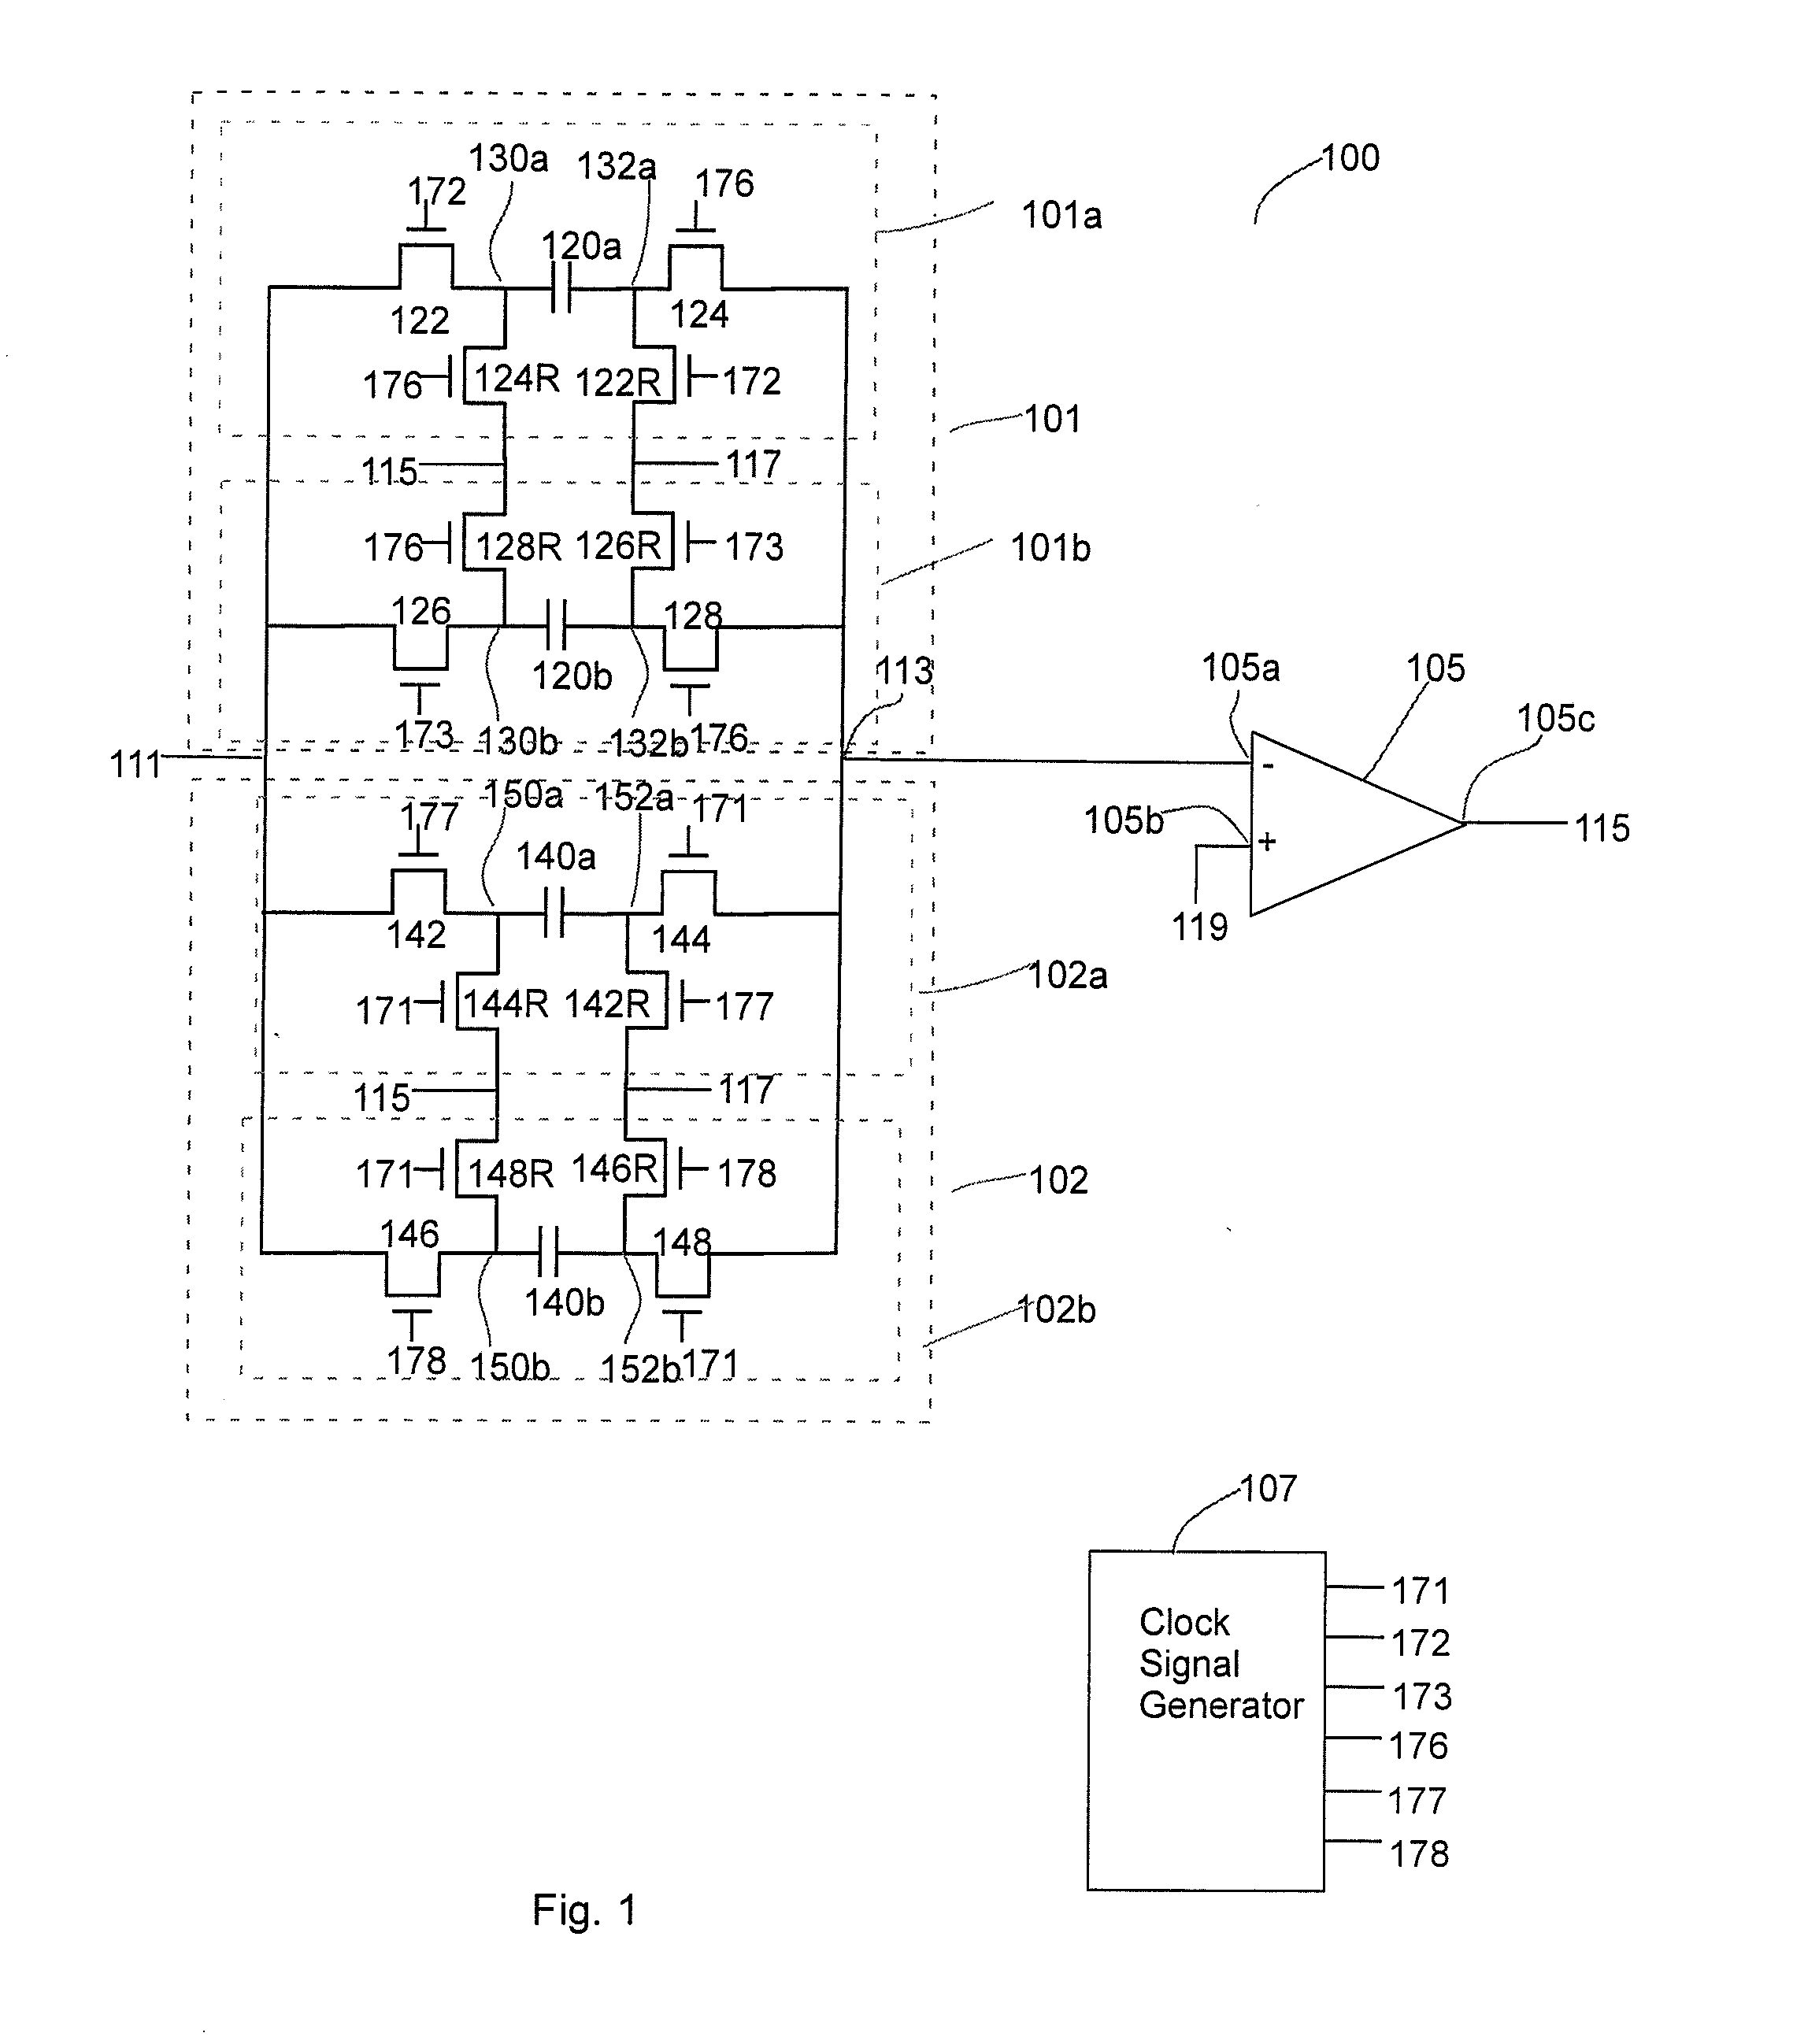 Switched capacitor notch filter with fast response time